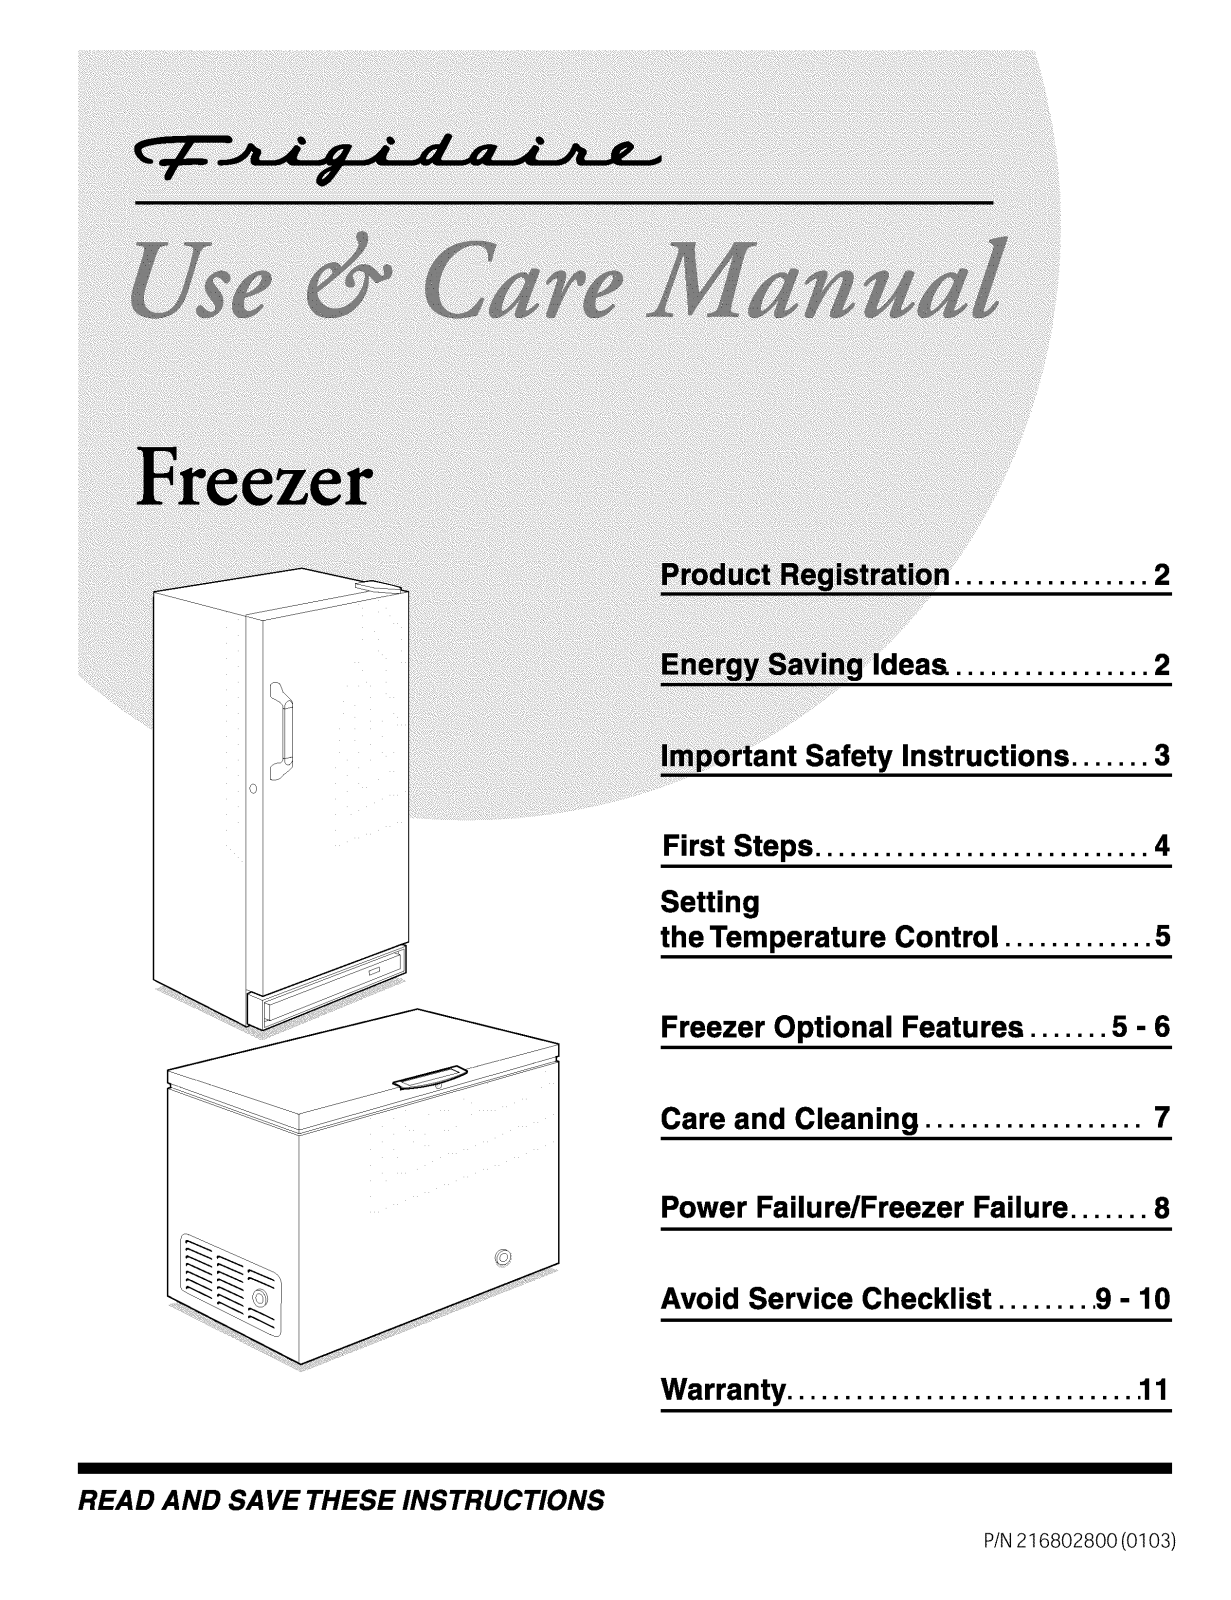 Frigidaire FFU21K2CW0, FFU21C5AW1, FFU17G3AW1, FFU09M2AW2, FFU09M2AW1 Owner’s Manual